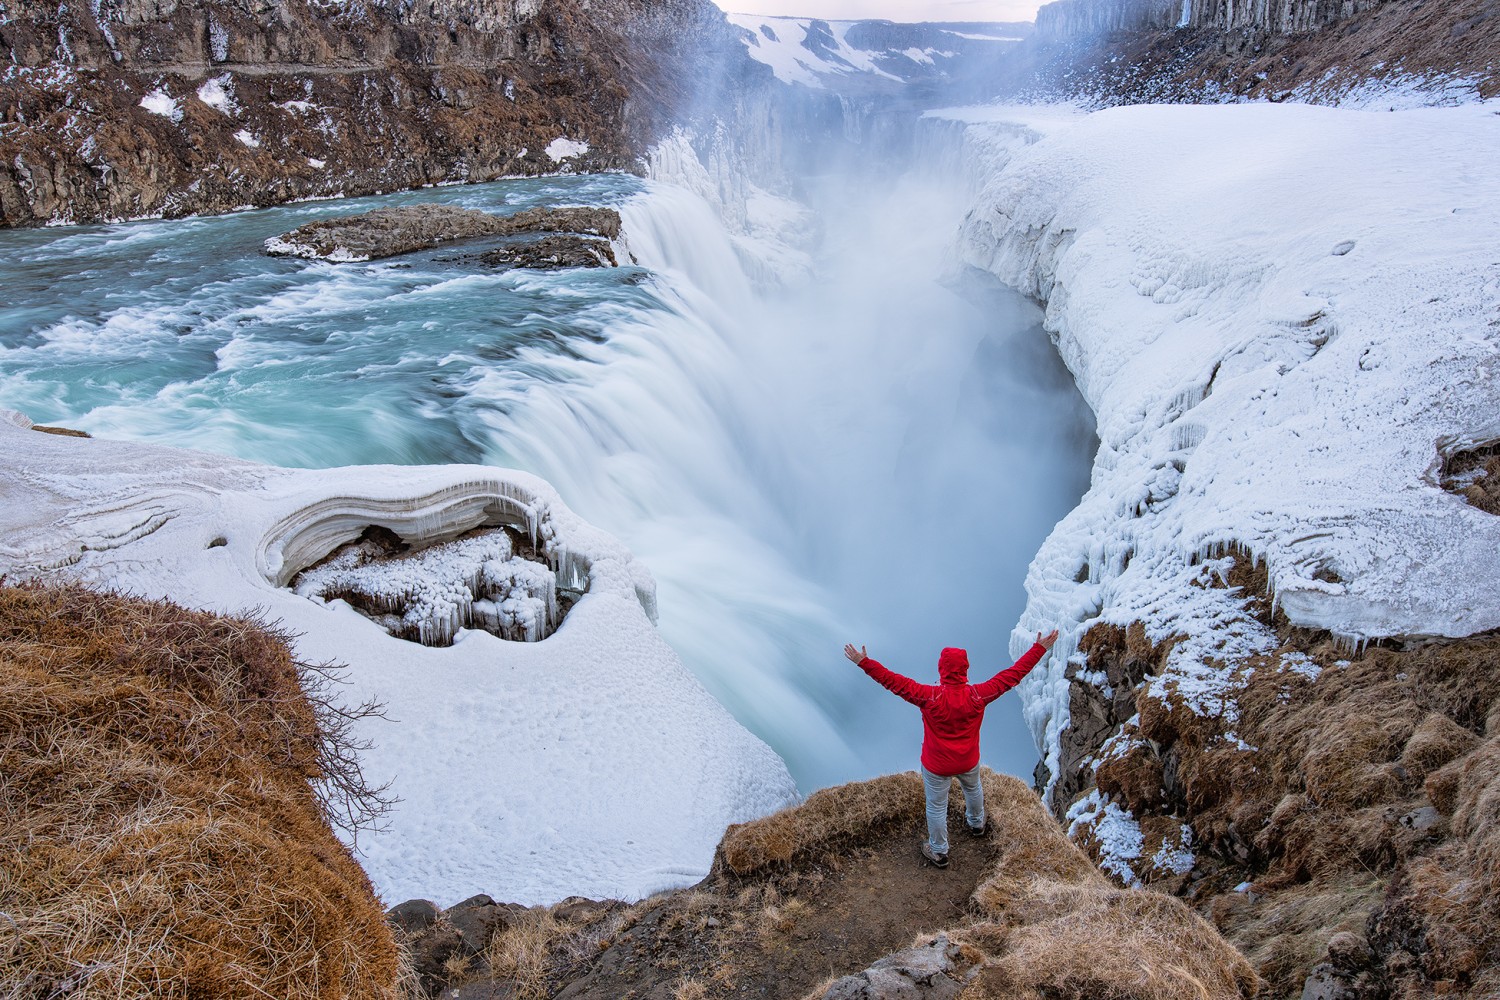 #500pxIcelandTour: Explore One of the Most Beautiful Countries on Earth